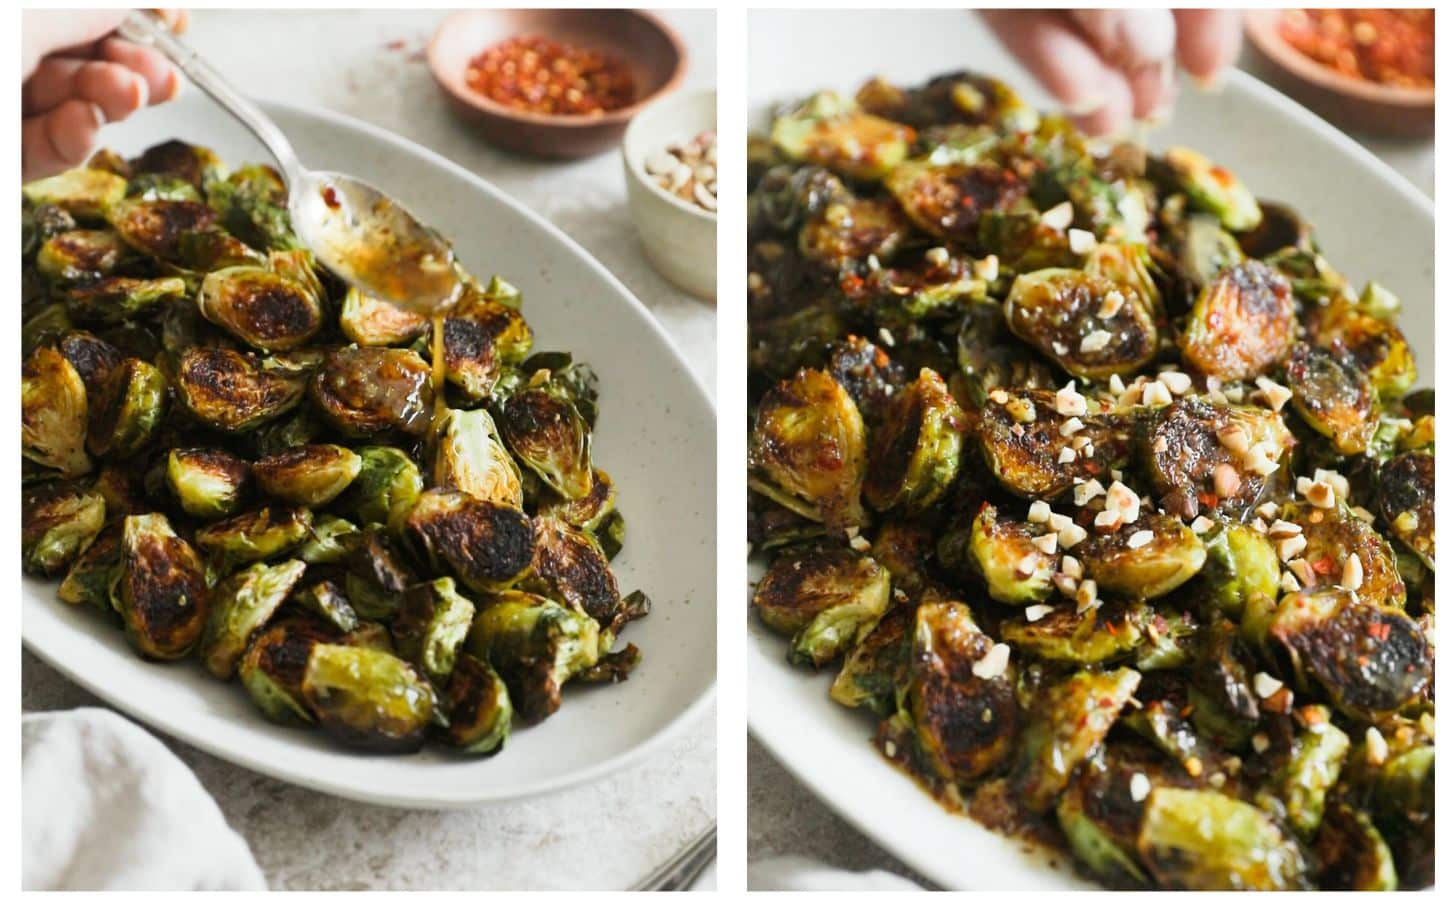 Two images; in the first, a hand is pouring hot honey glaze over roasted Brussels sprouts on a white platter. In the second, a hand is sprinkling hazelnuts over the sprouts.